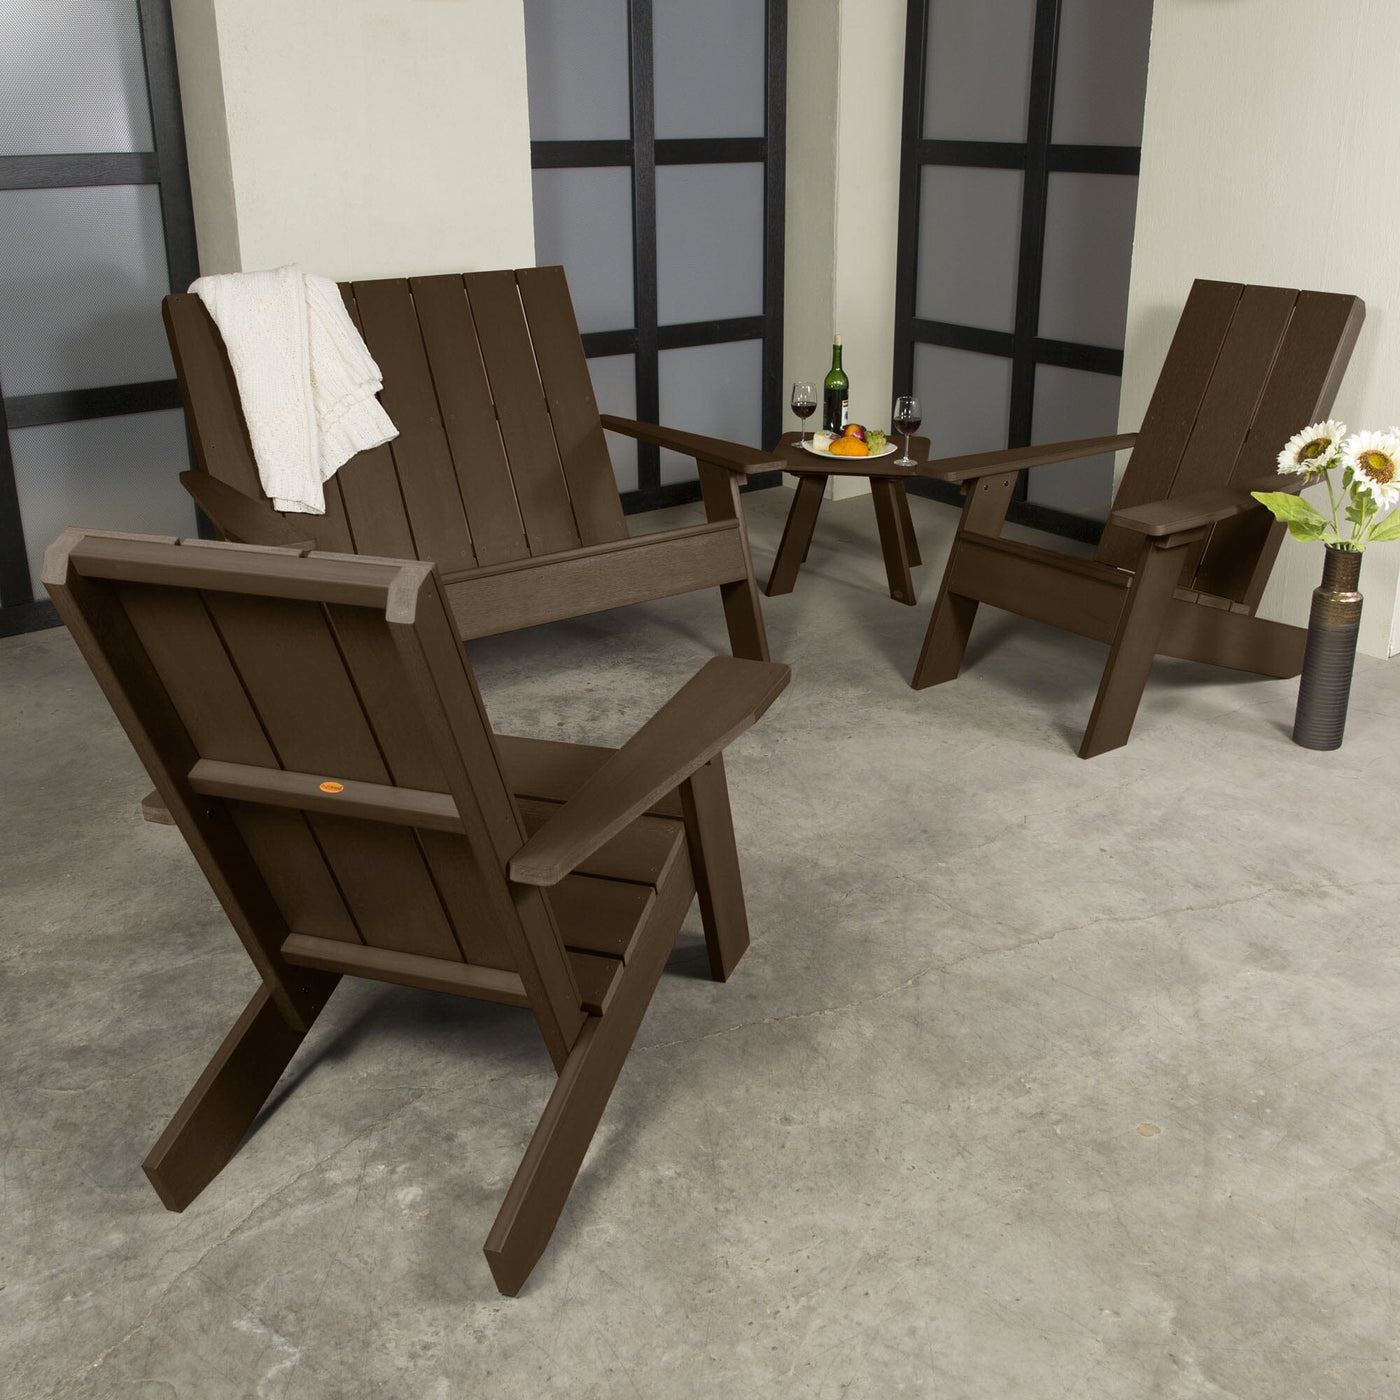 Brown Italica 4-piece set on porch with decorations and wine. 